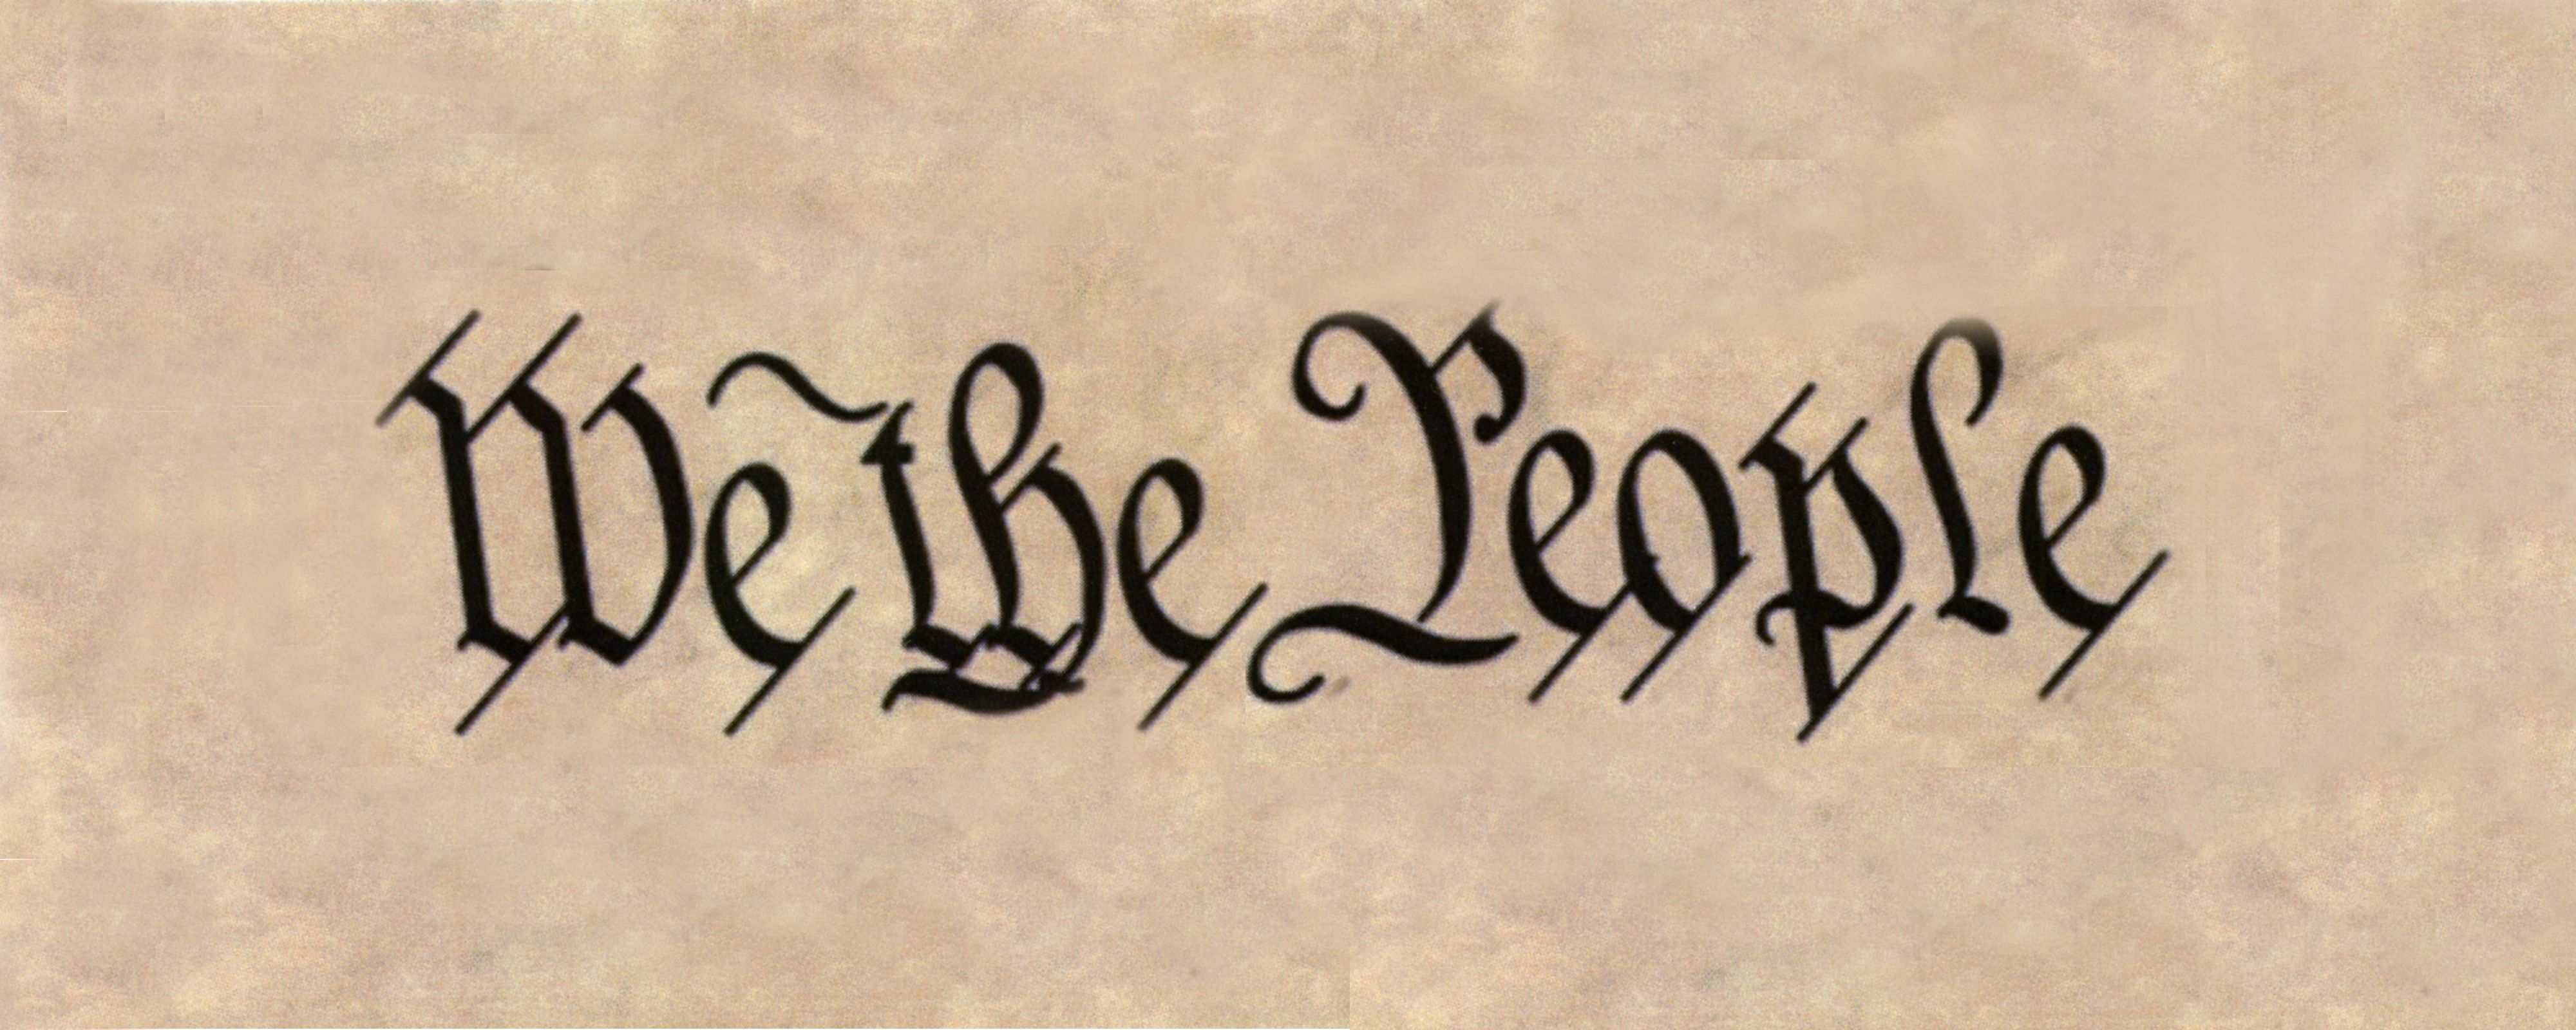 constitution clipart we the person